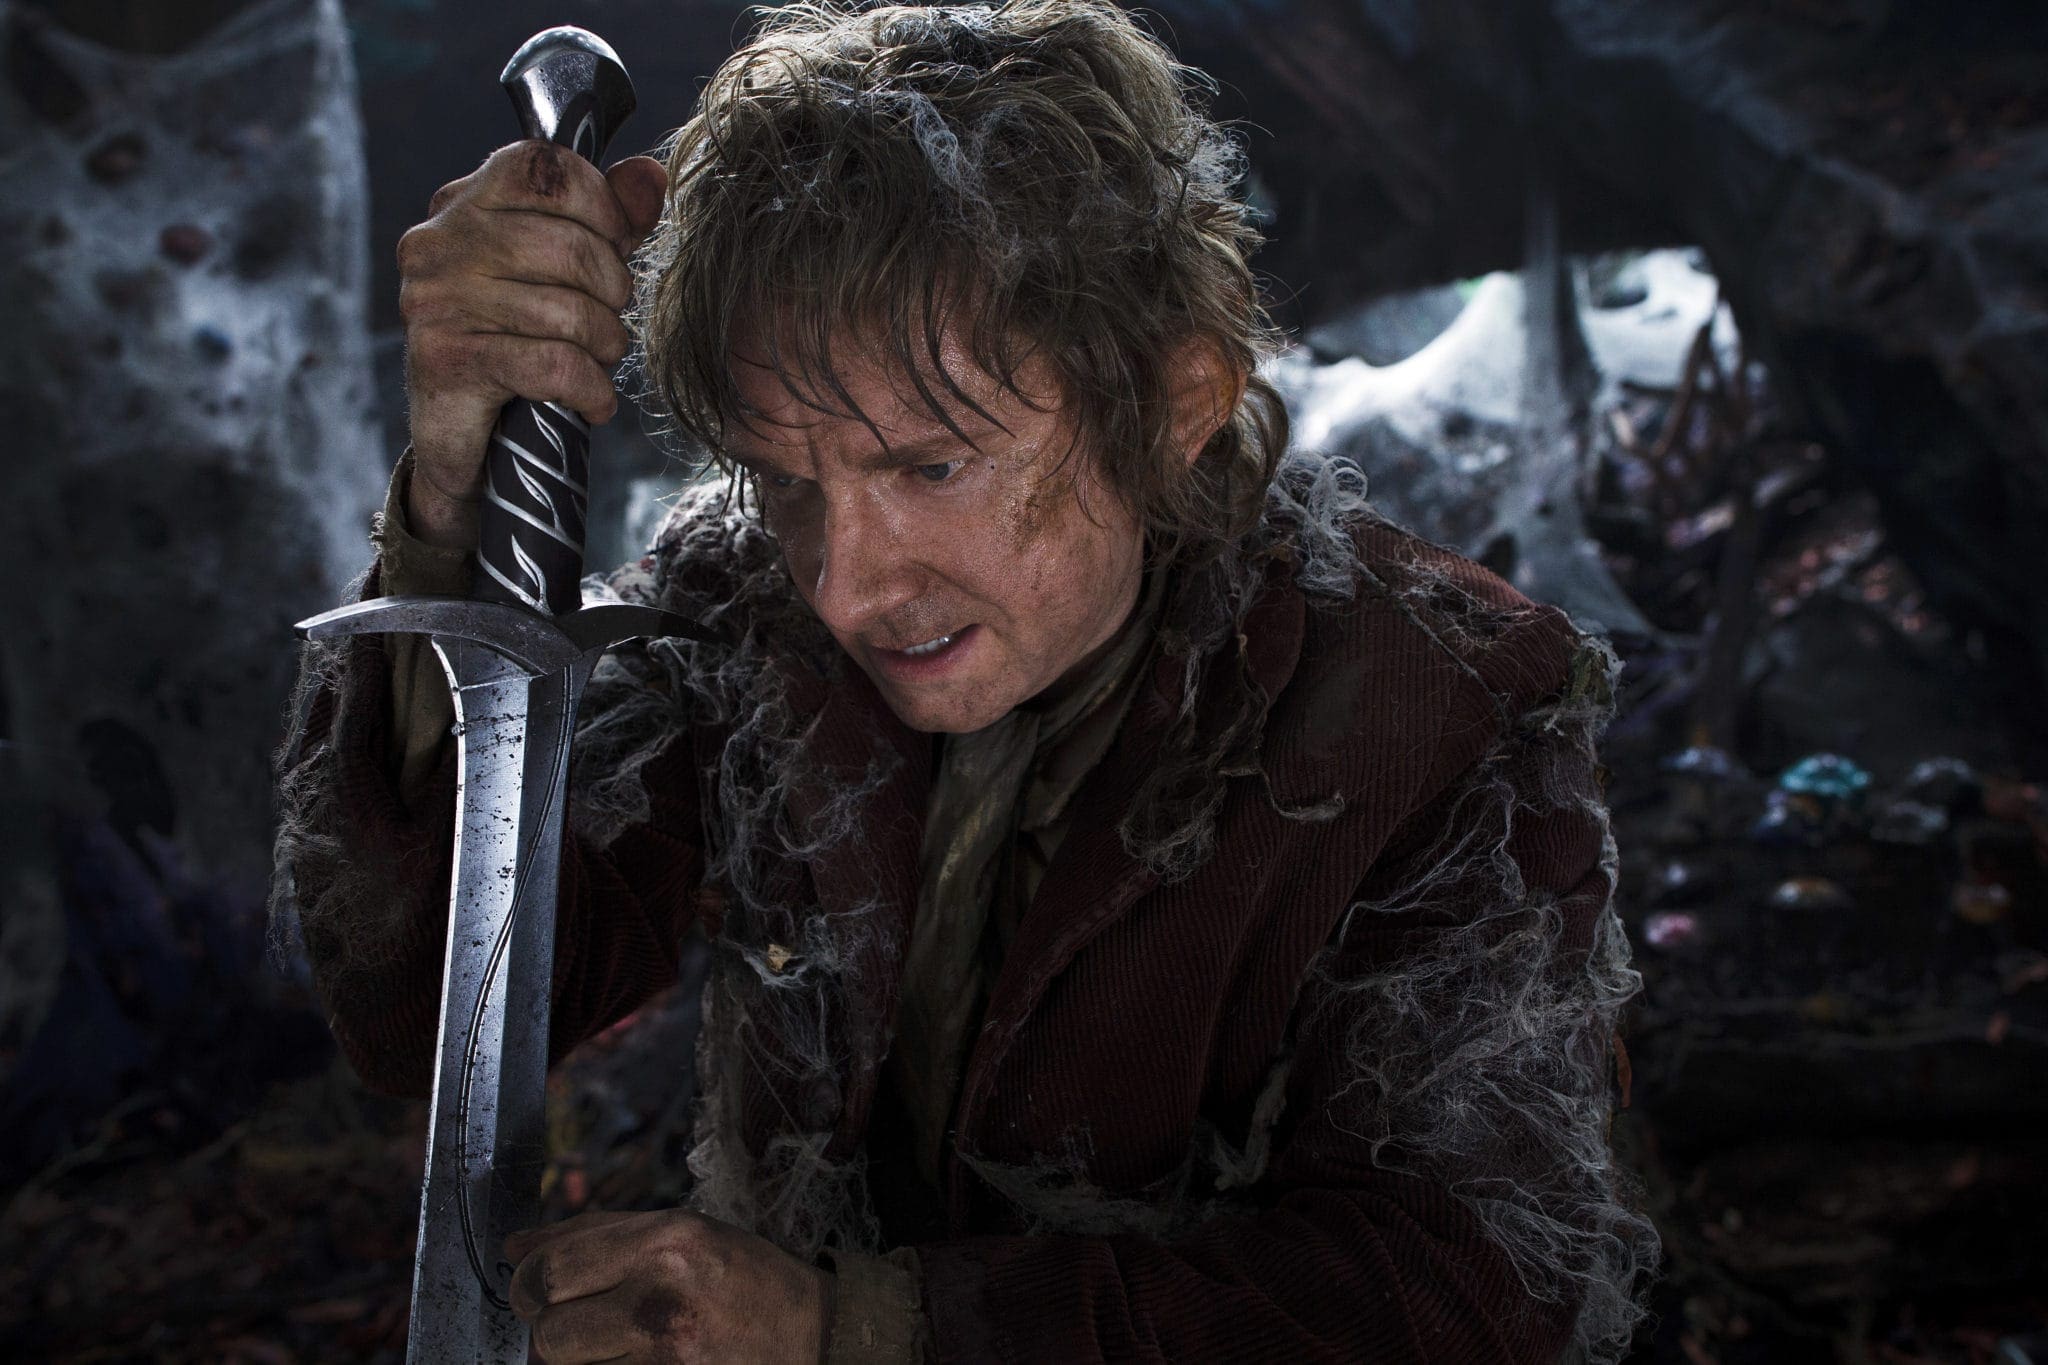 film, film news, movie news, movie trailers, movies, peter jackson, the hobbit, The Hobbit: Desloation of Smaug, trailers